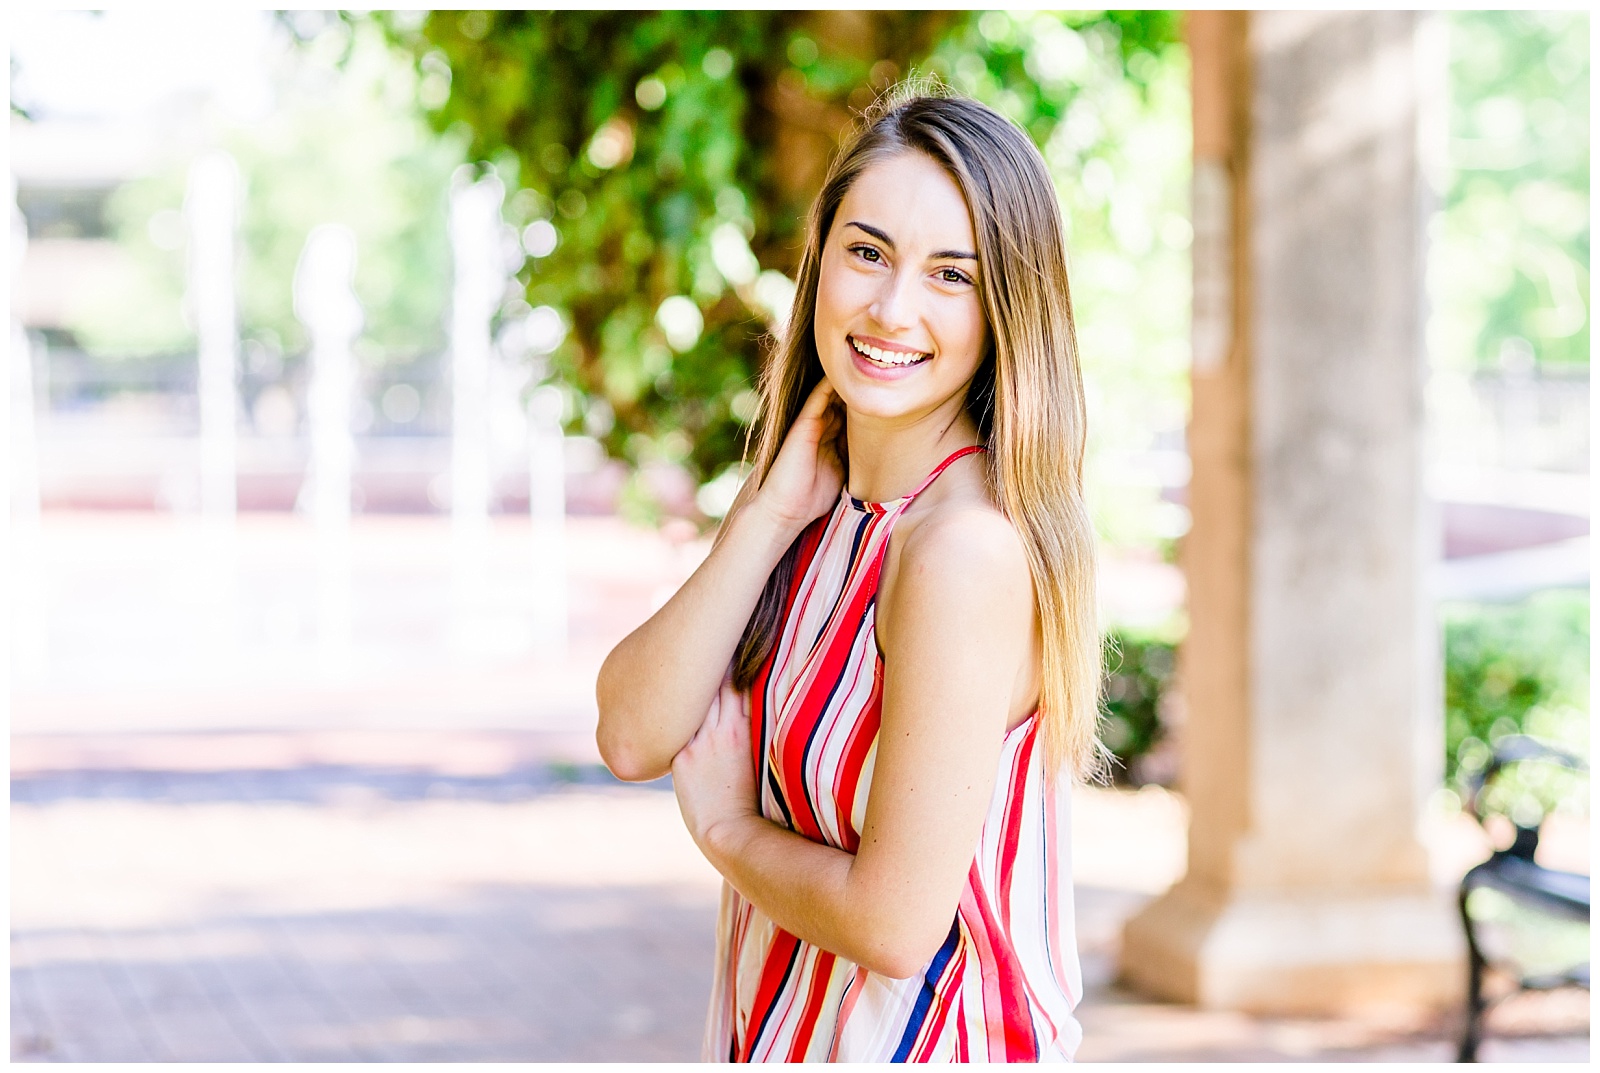 downtown senior session in front of greenery covered arch with girl in bright striped top